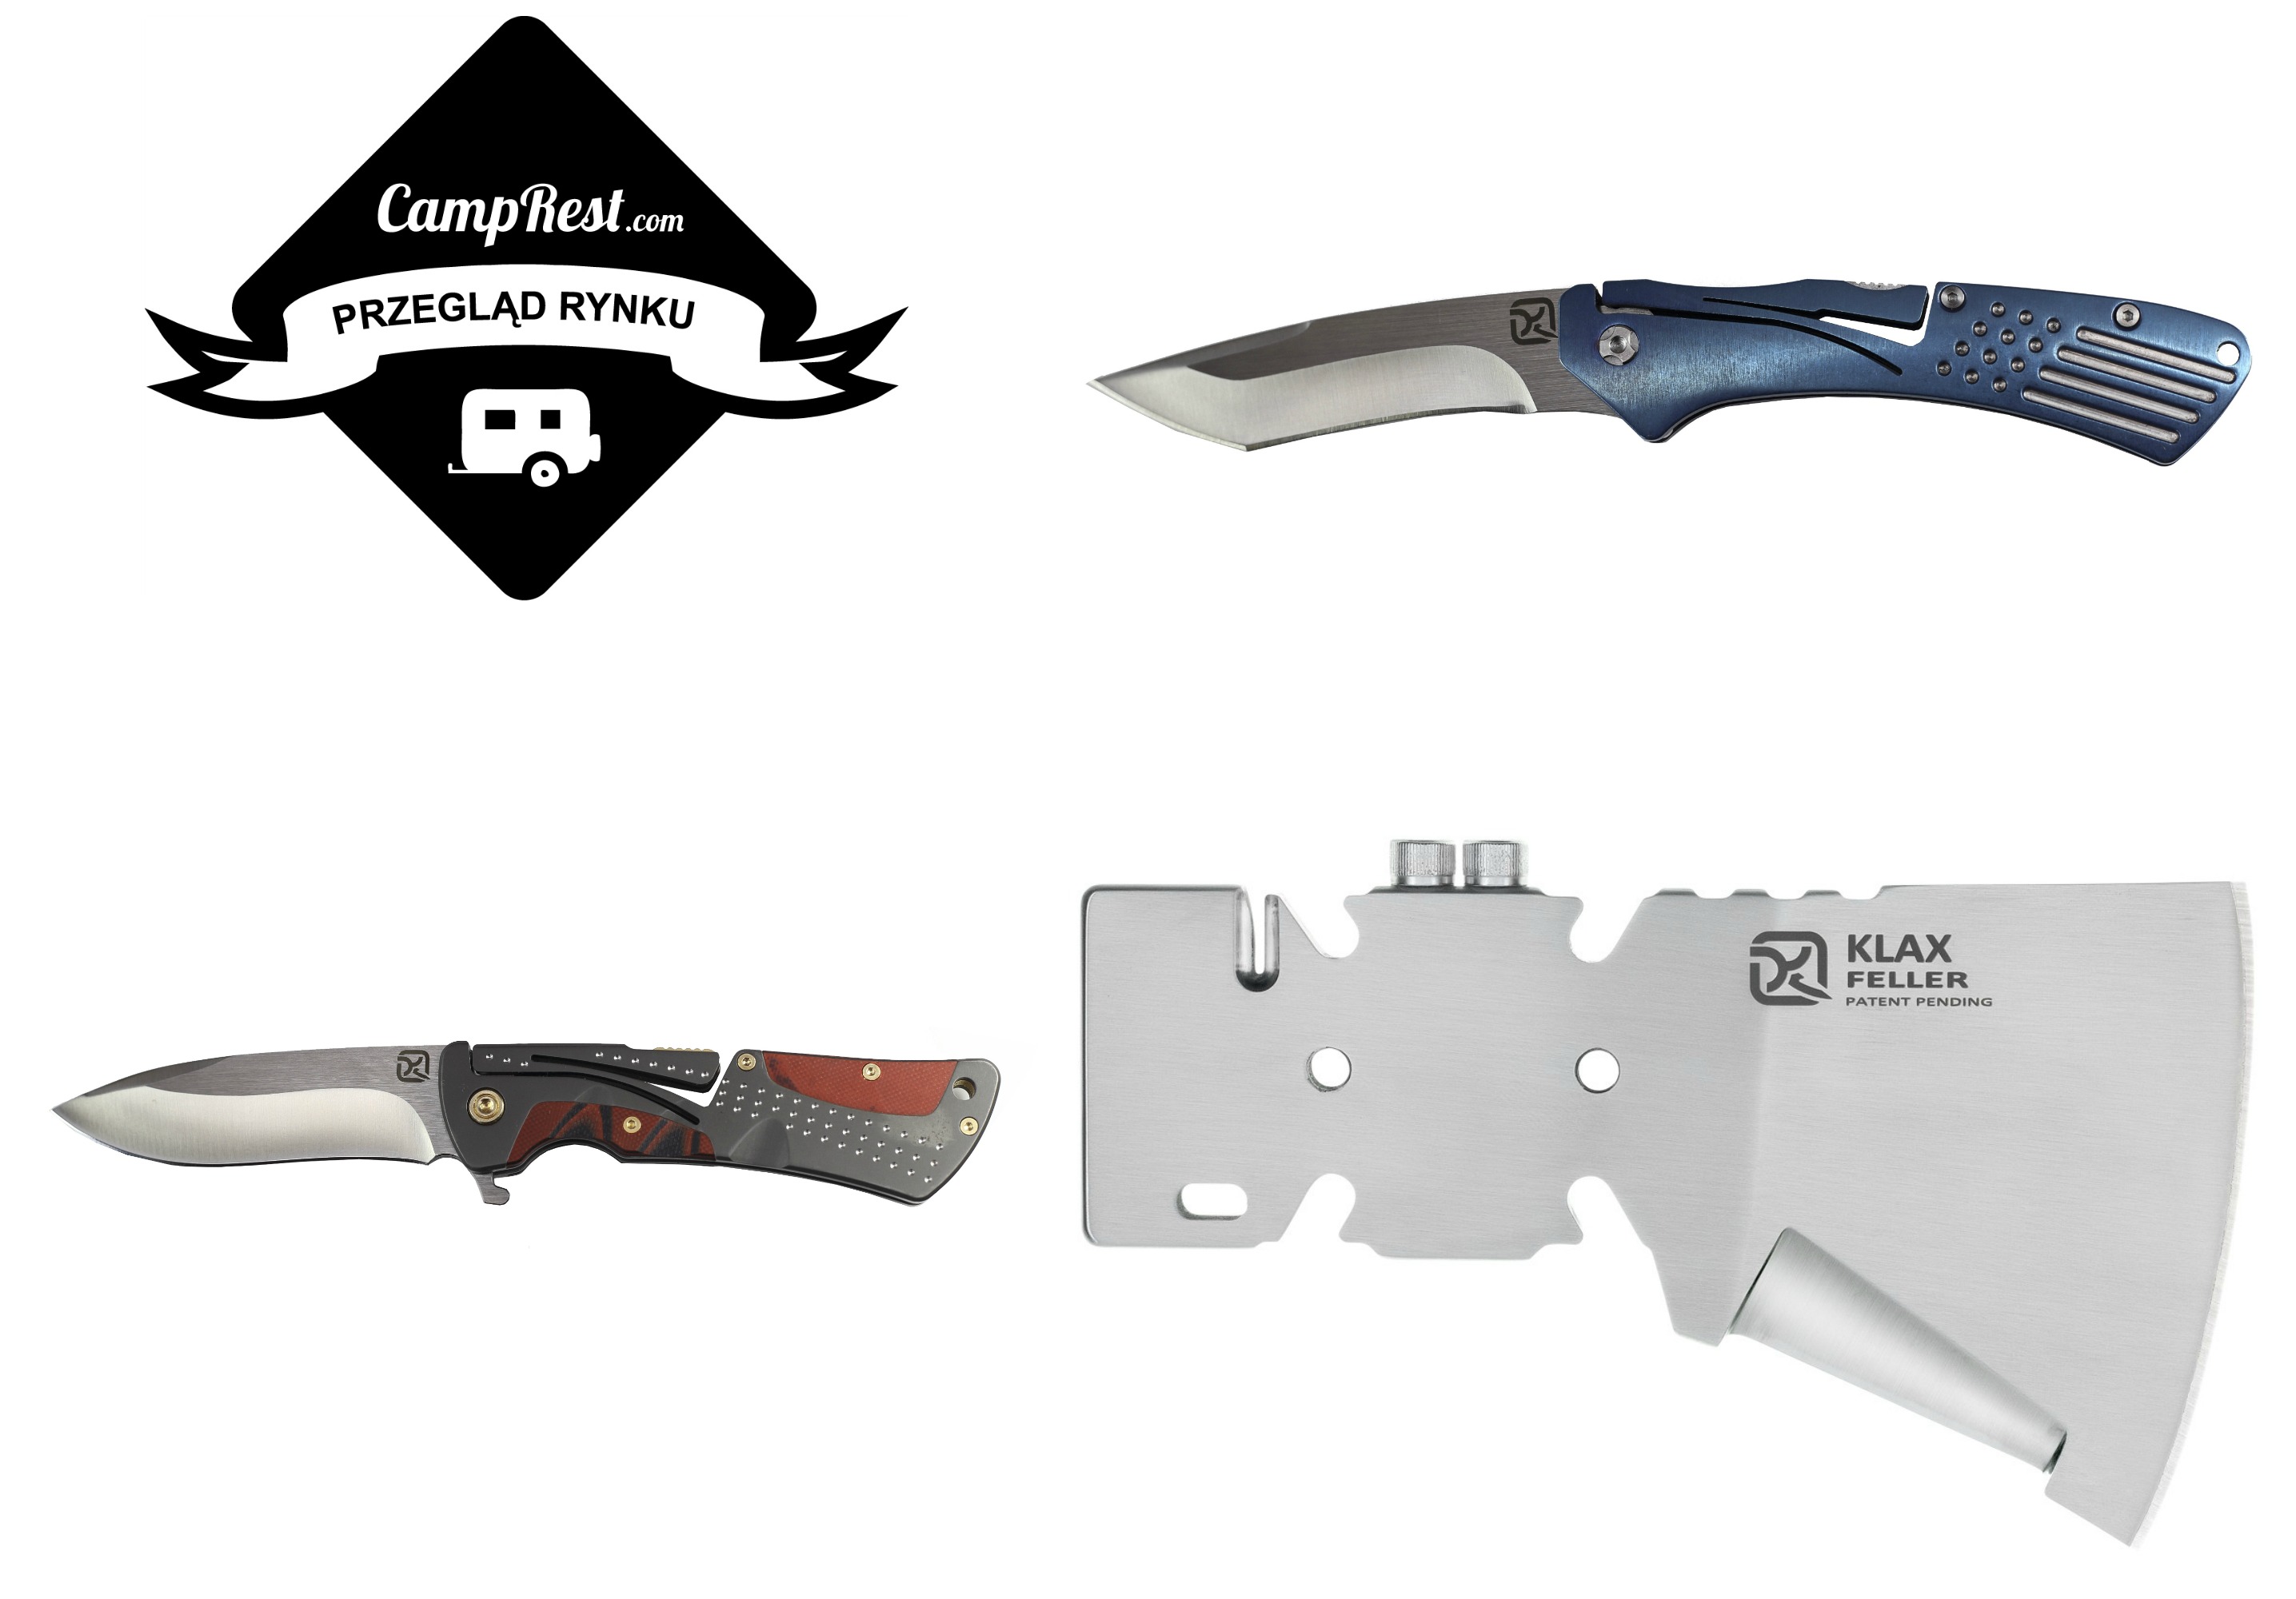 American blade quality - knives not only for camping – main image